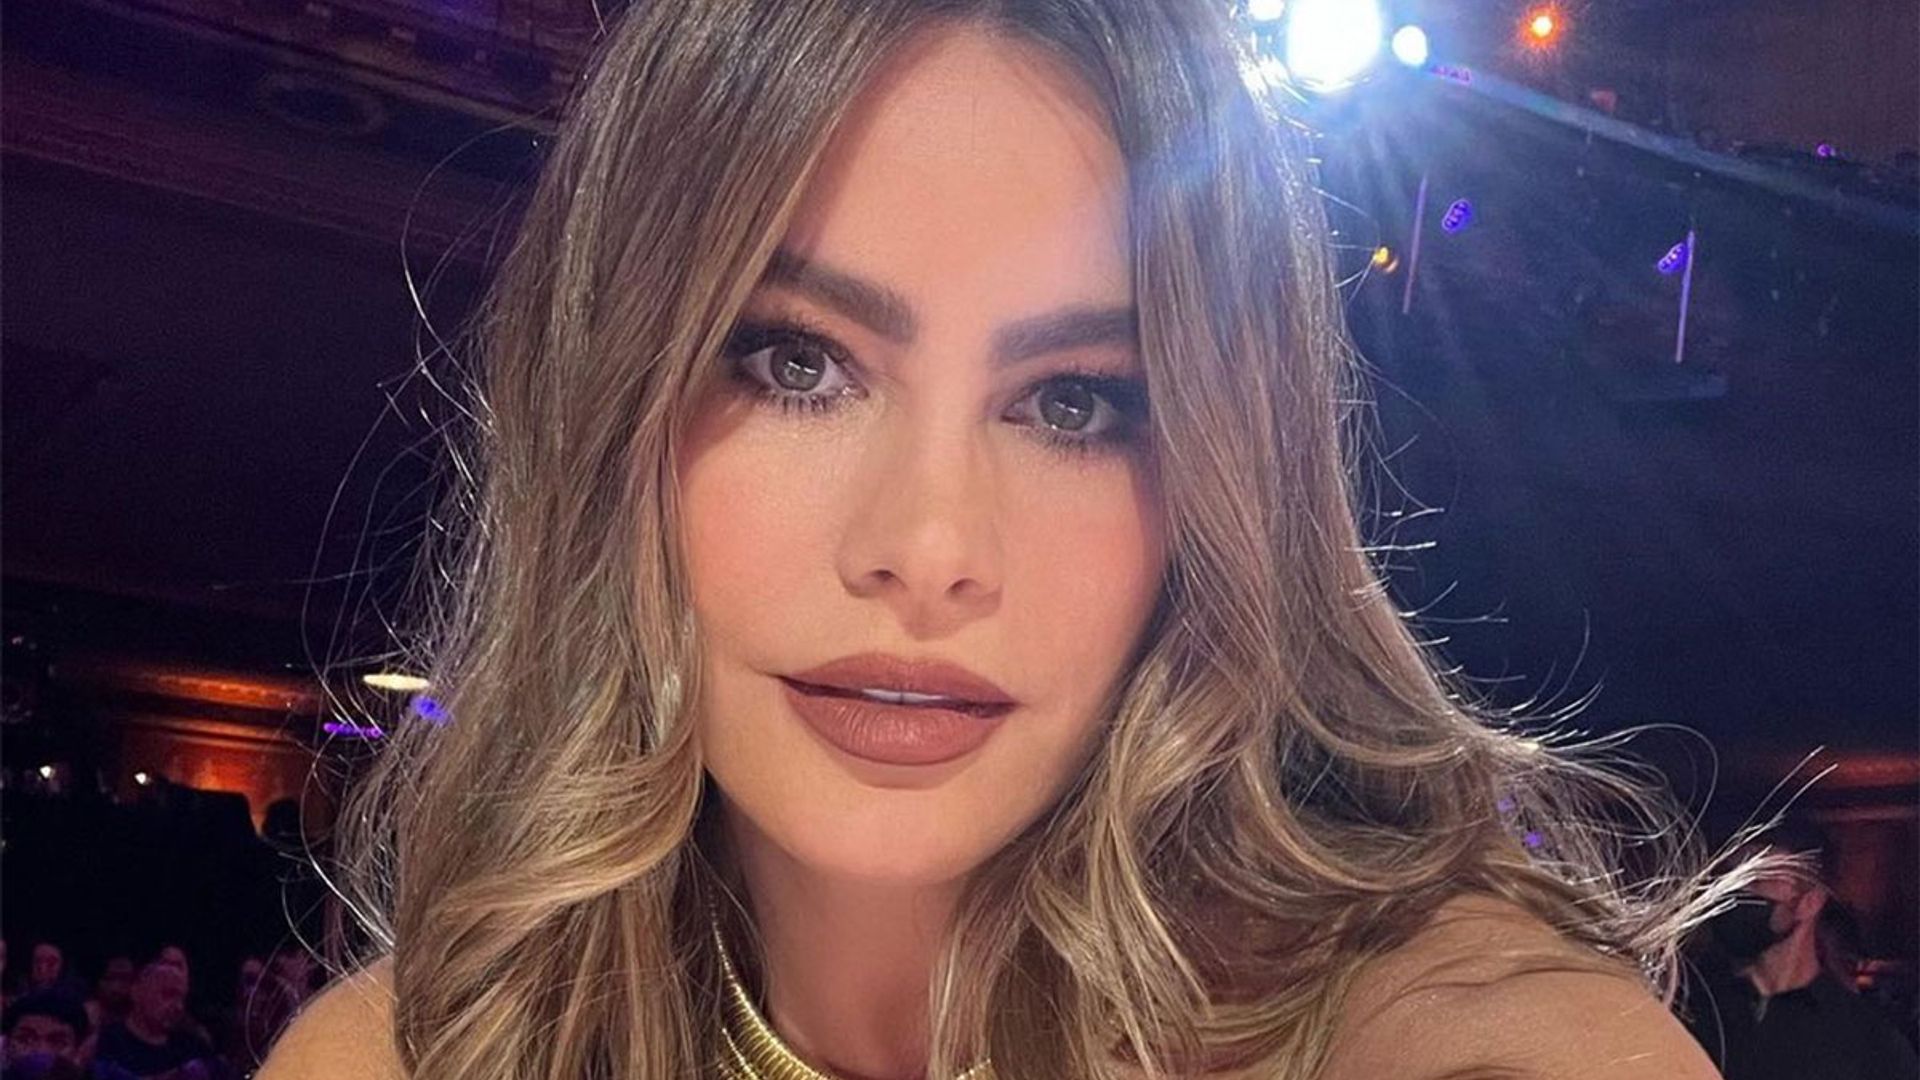 AGT' Fans Are Blowing Up One of Sofía Vergara's Instagram With